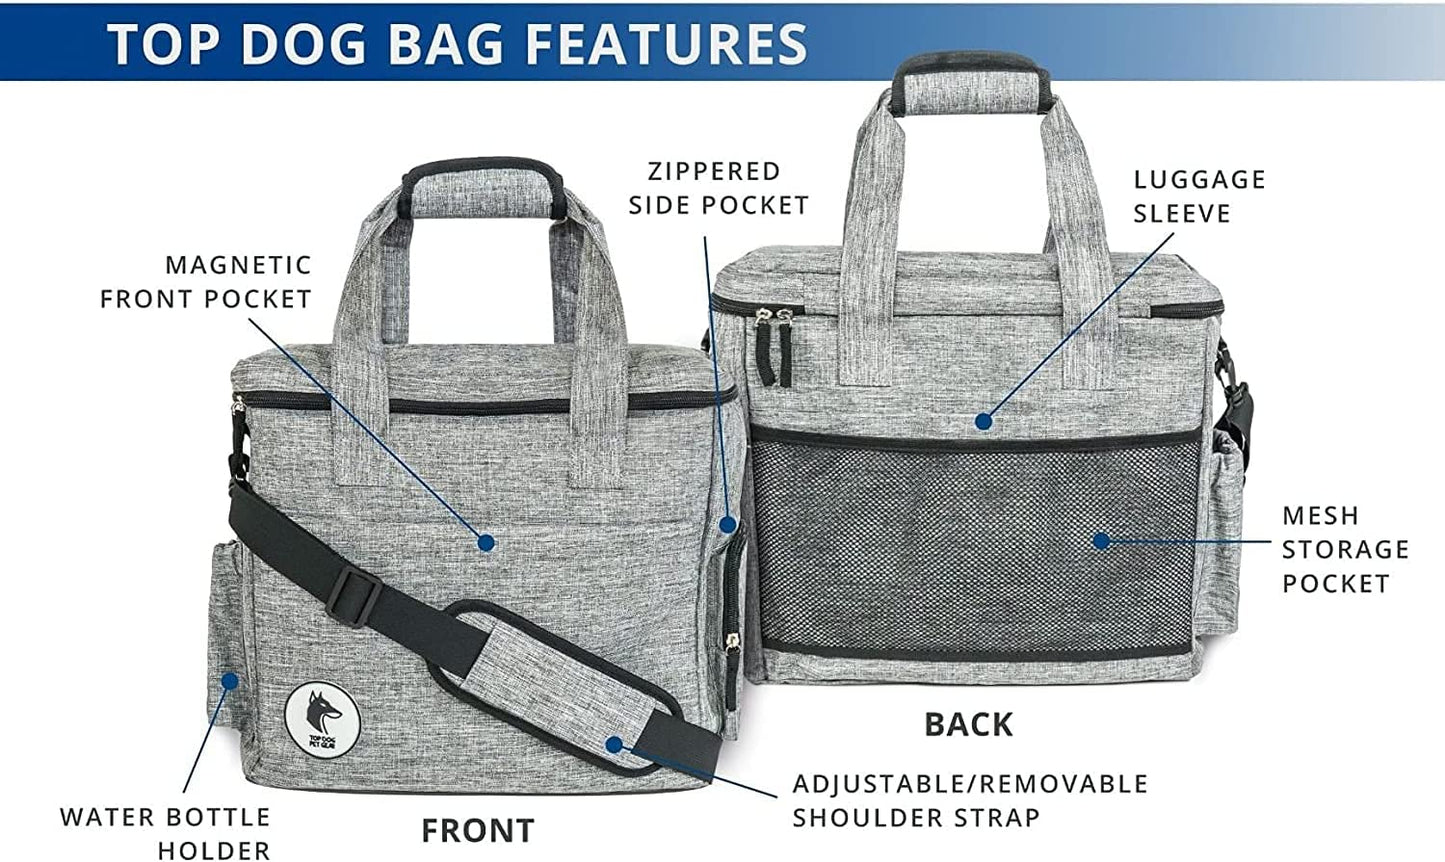 Grey Dog Travel Bag for Supplies - Includes Travel Bag, Travel Dog Bowls, Food Storage - Airline Approved Dog Bags for Traveling - Dog Travel Accessories for Camping, Beach